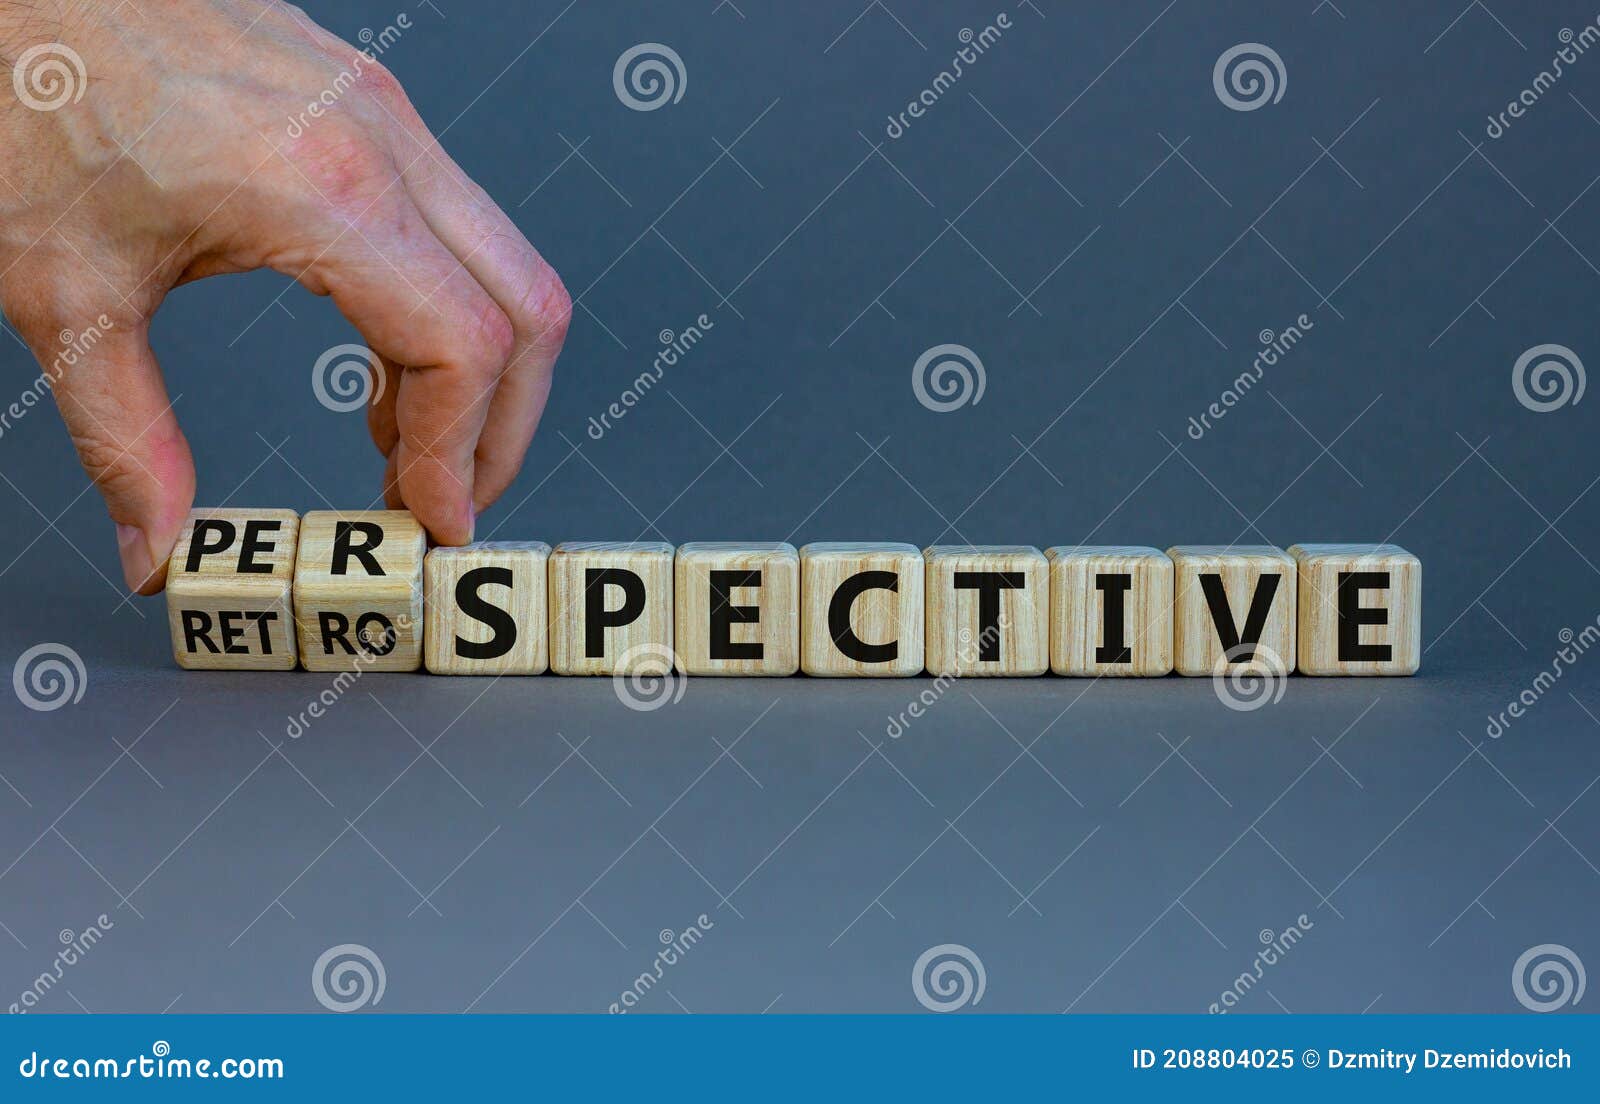 businessman hand turns cubes and changes word 'retrospective' to 'perspective'. beautiful